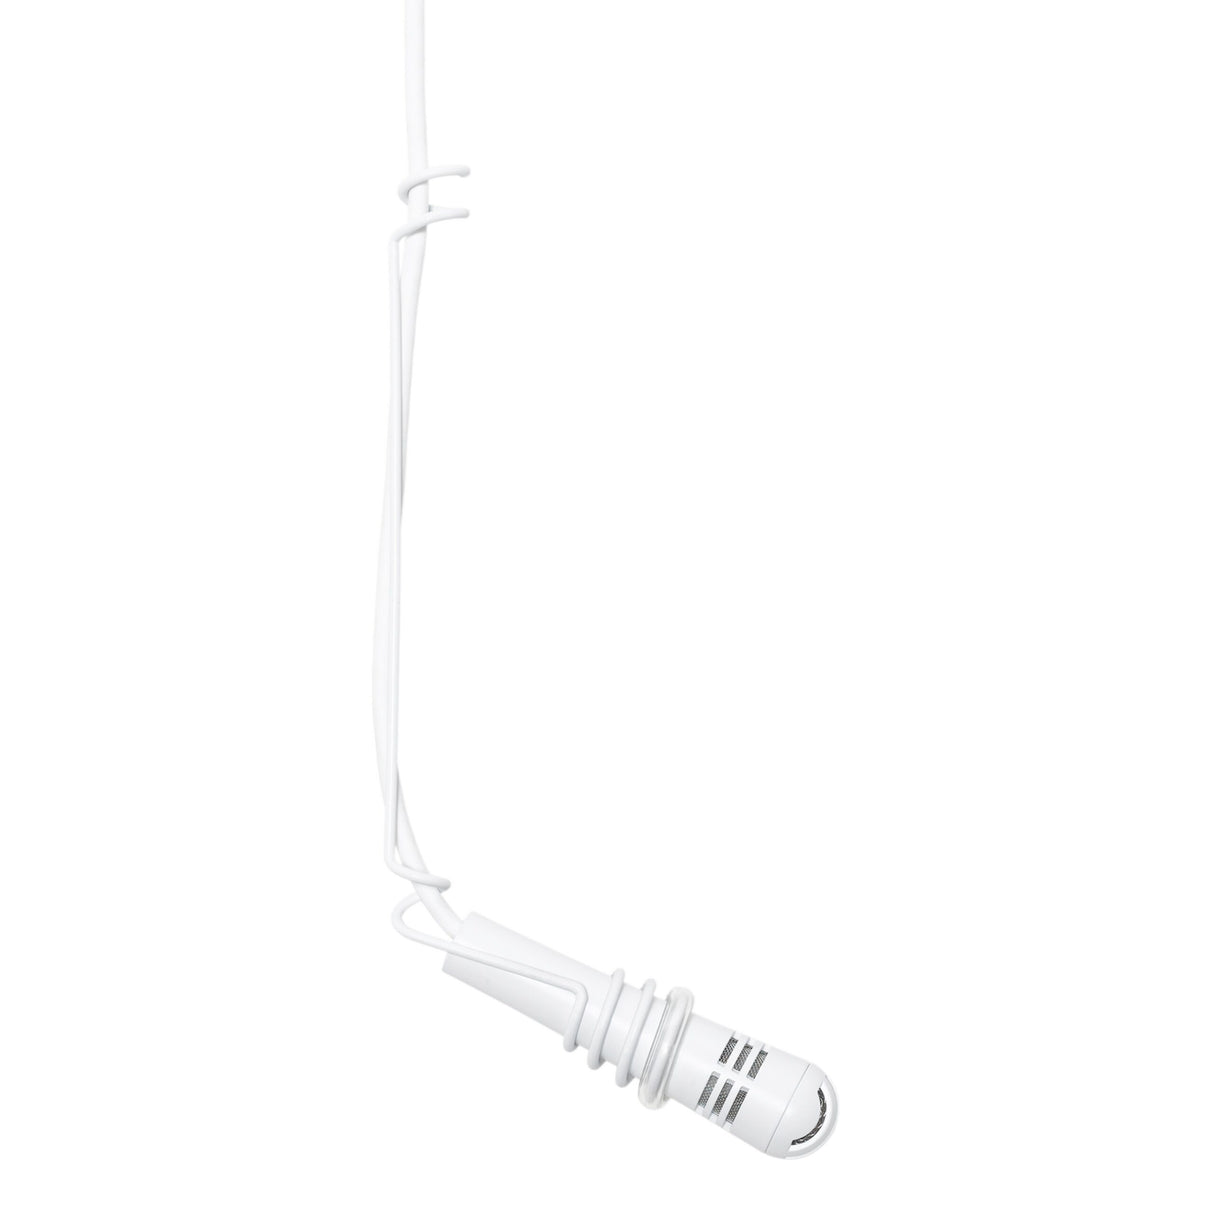 AKG CHM99 Hanging Cardioid Condenser Microphone, White